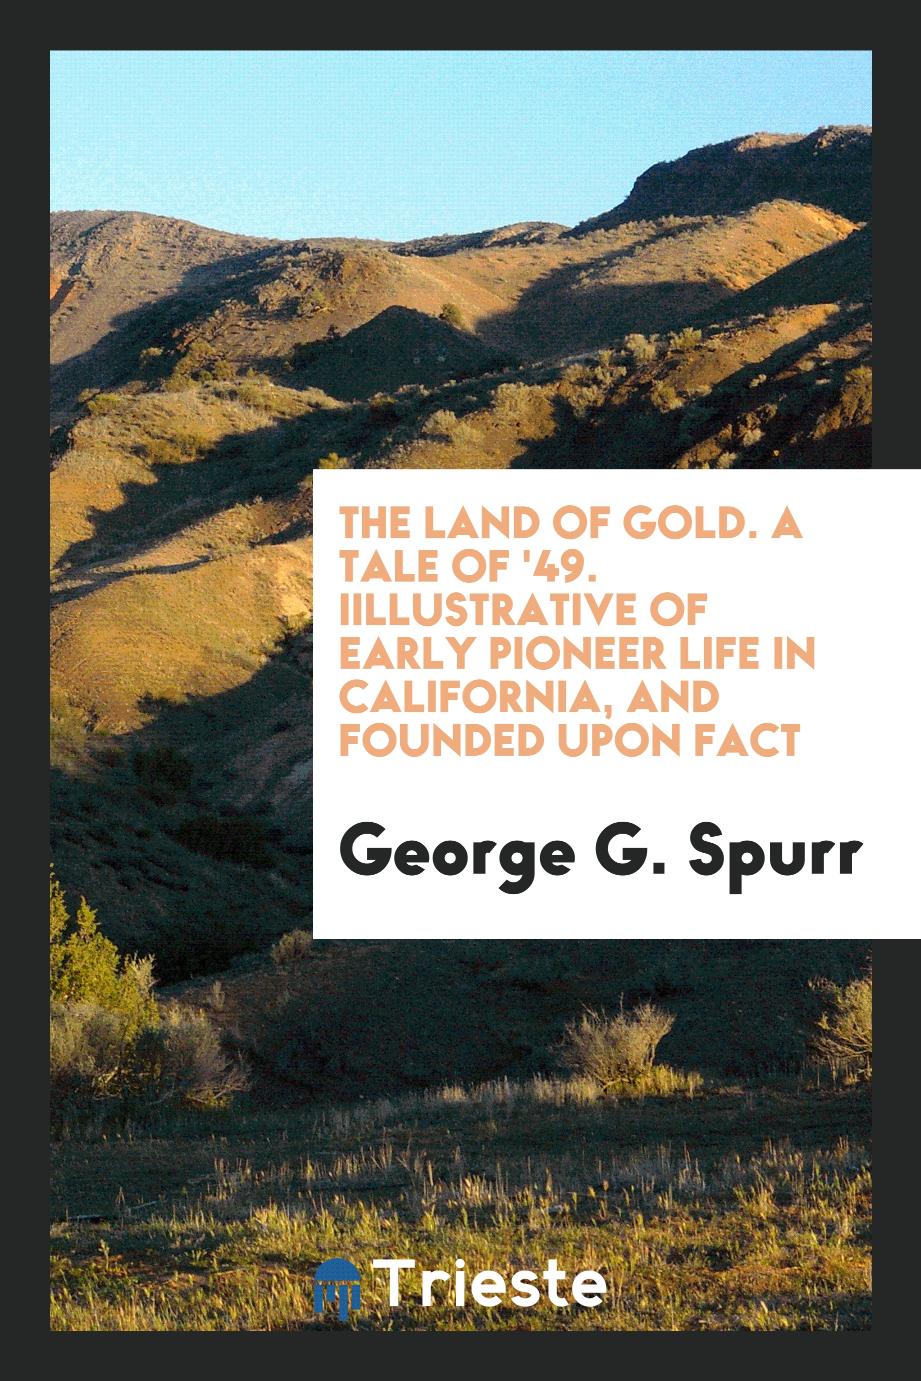 The Land of Gold. A Tale of '49. Iillustrative of Early Pioneer Life in California, and Founded upon Fact